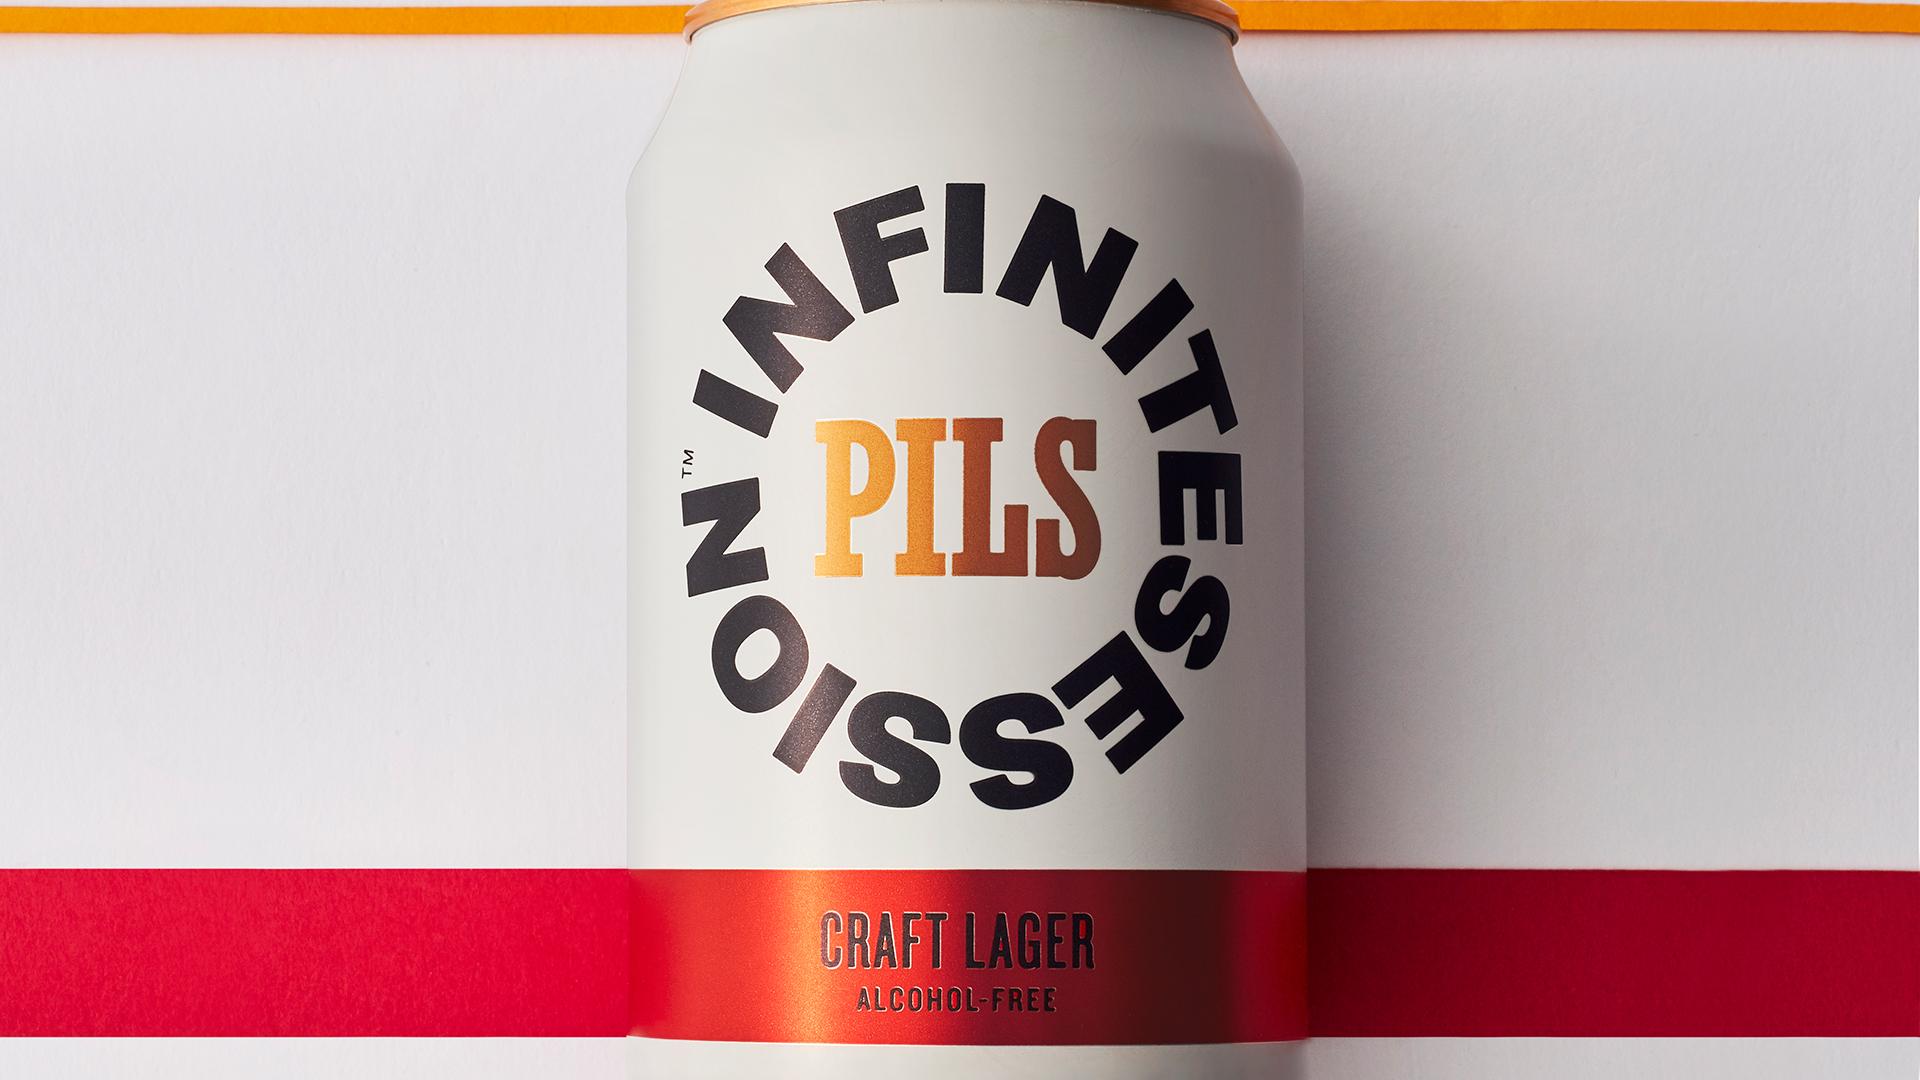 Non Alcoholic Beers London – Infinite Session's Pils – 0.5% ABV